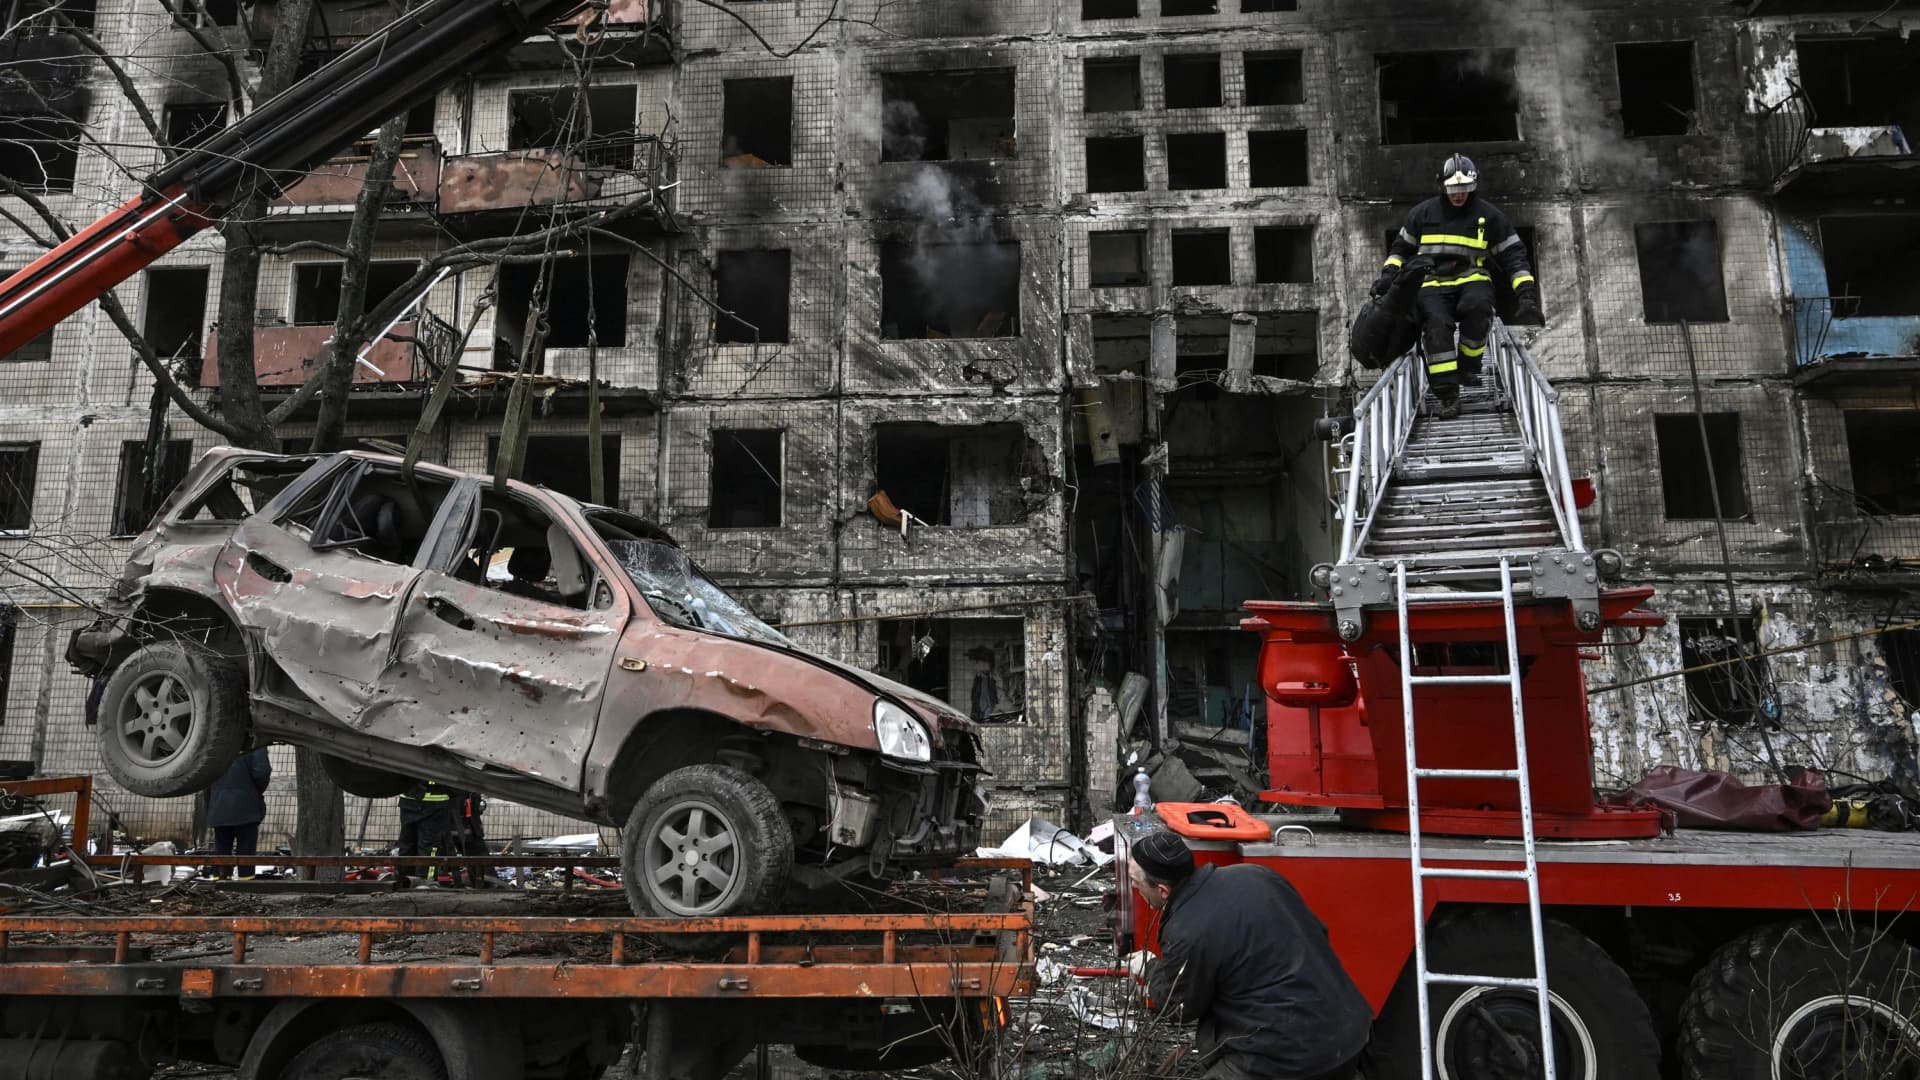 A ruined car is placed on a flatbed lorry from in front of a destroyed apartment building after it was shelled in the northwestern Obolon district of Kyiv on March 14, 2022. - Two people were killed on March 14, 2022, as various neighbourhoods of the Ukraine capital Kyiv came under shelling and missile attacks, city officials said, after the Russia's military invaded the Ukraine on February 24, 2022. (Photo by Aris Messinis / AFP) (Photo by ARIS MESSINIS/AFP via Getty Images)